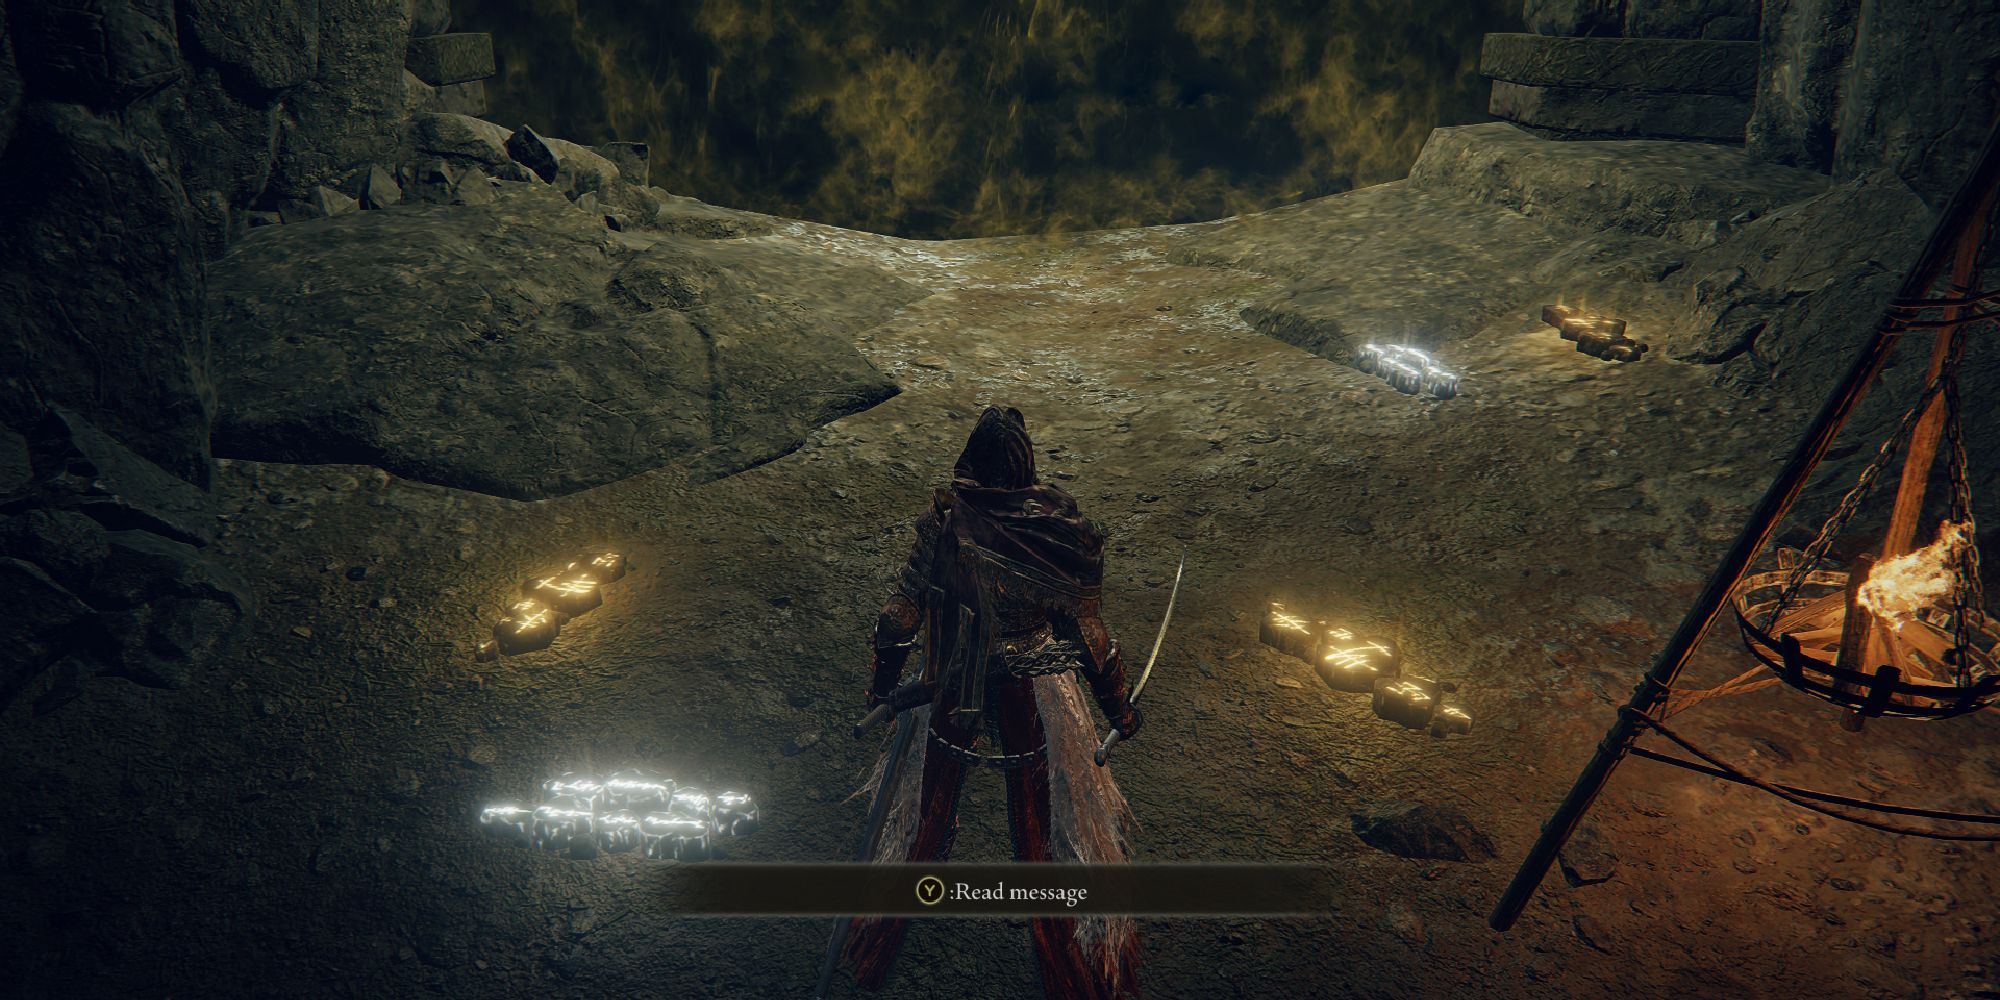 Tarnished standing in front of a boss fog wall in Elden Ring, surrounded by golden summon signs